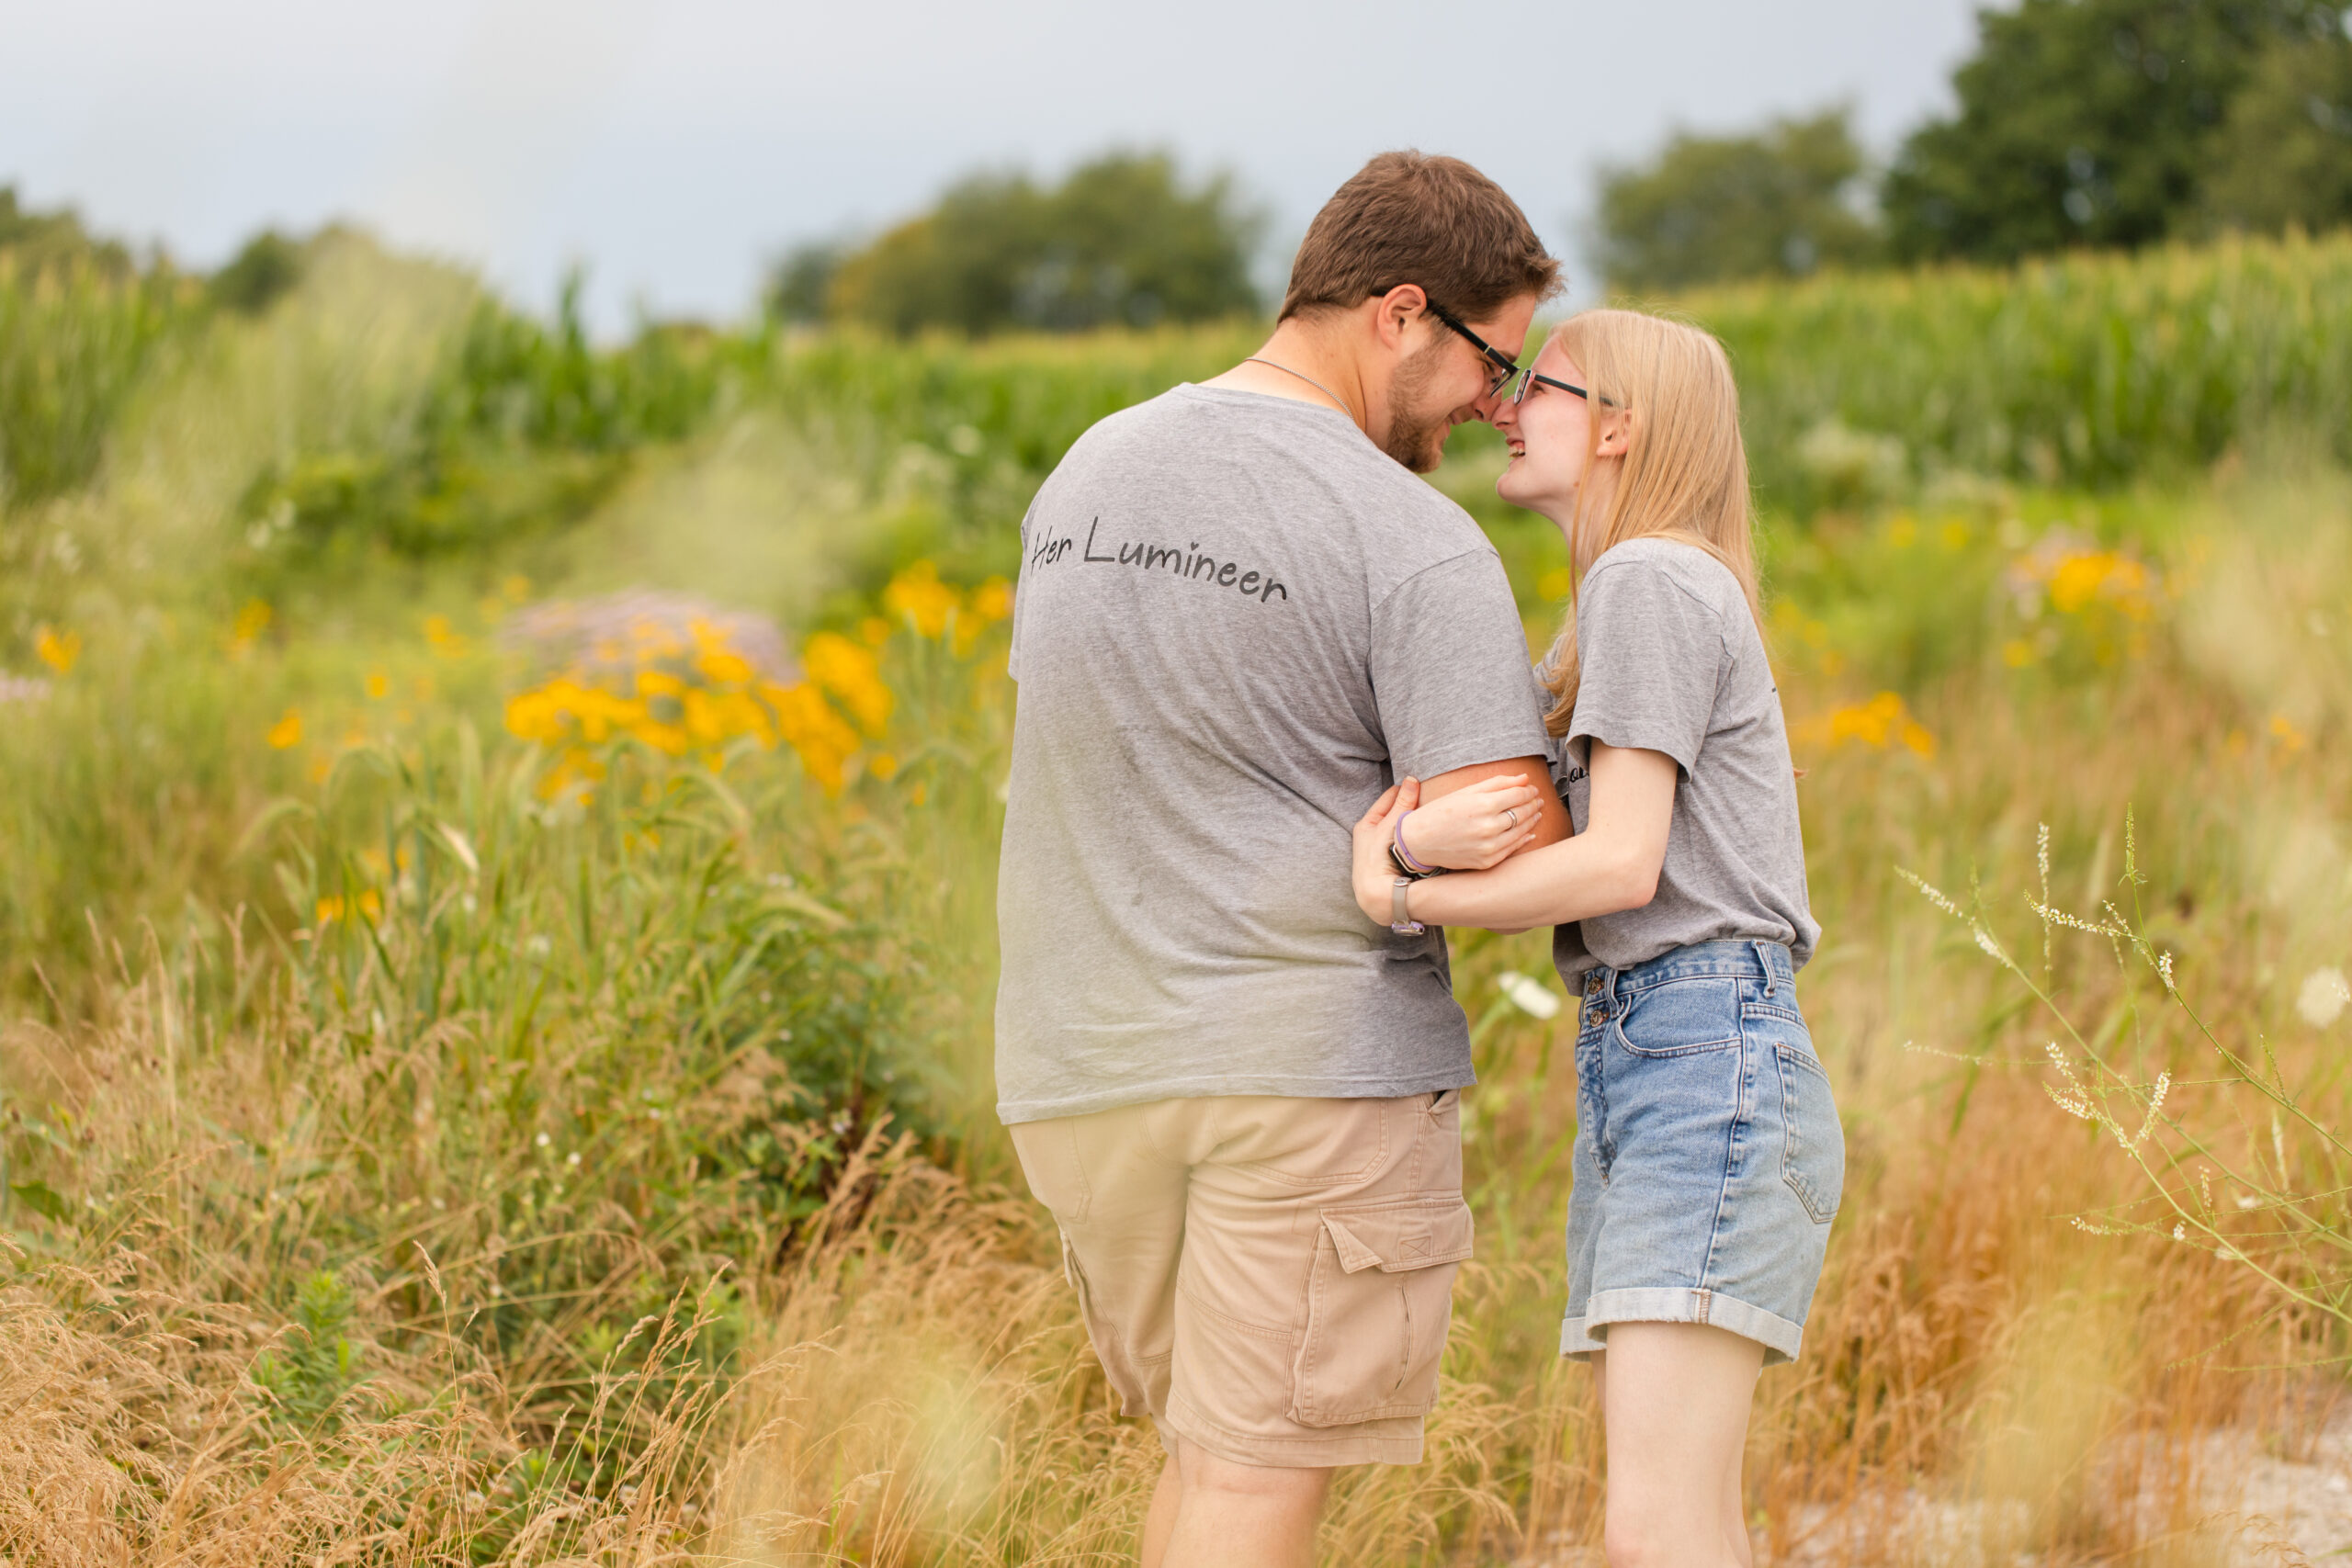 man and woman embracing face to face in a field of wildflowers